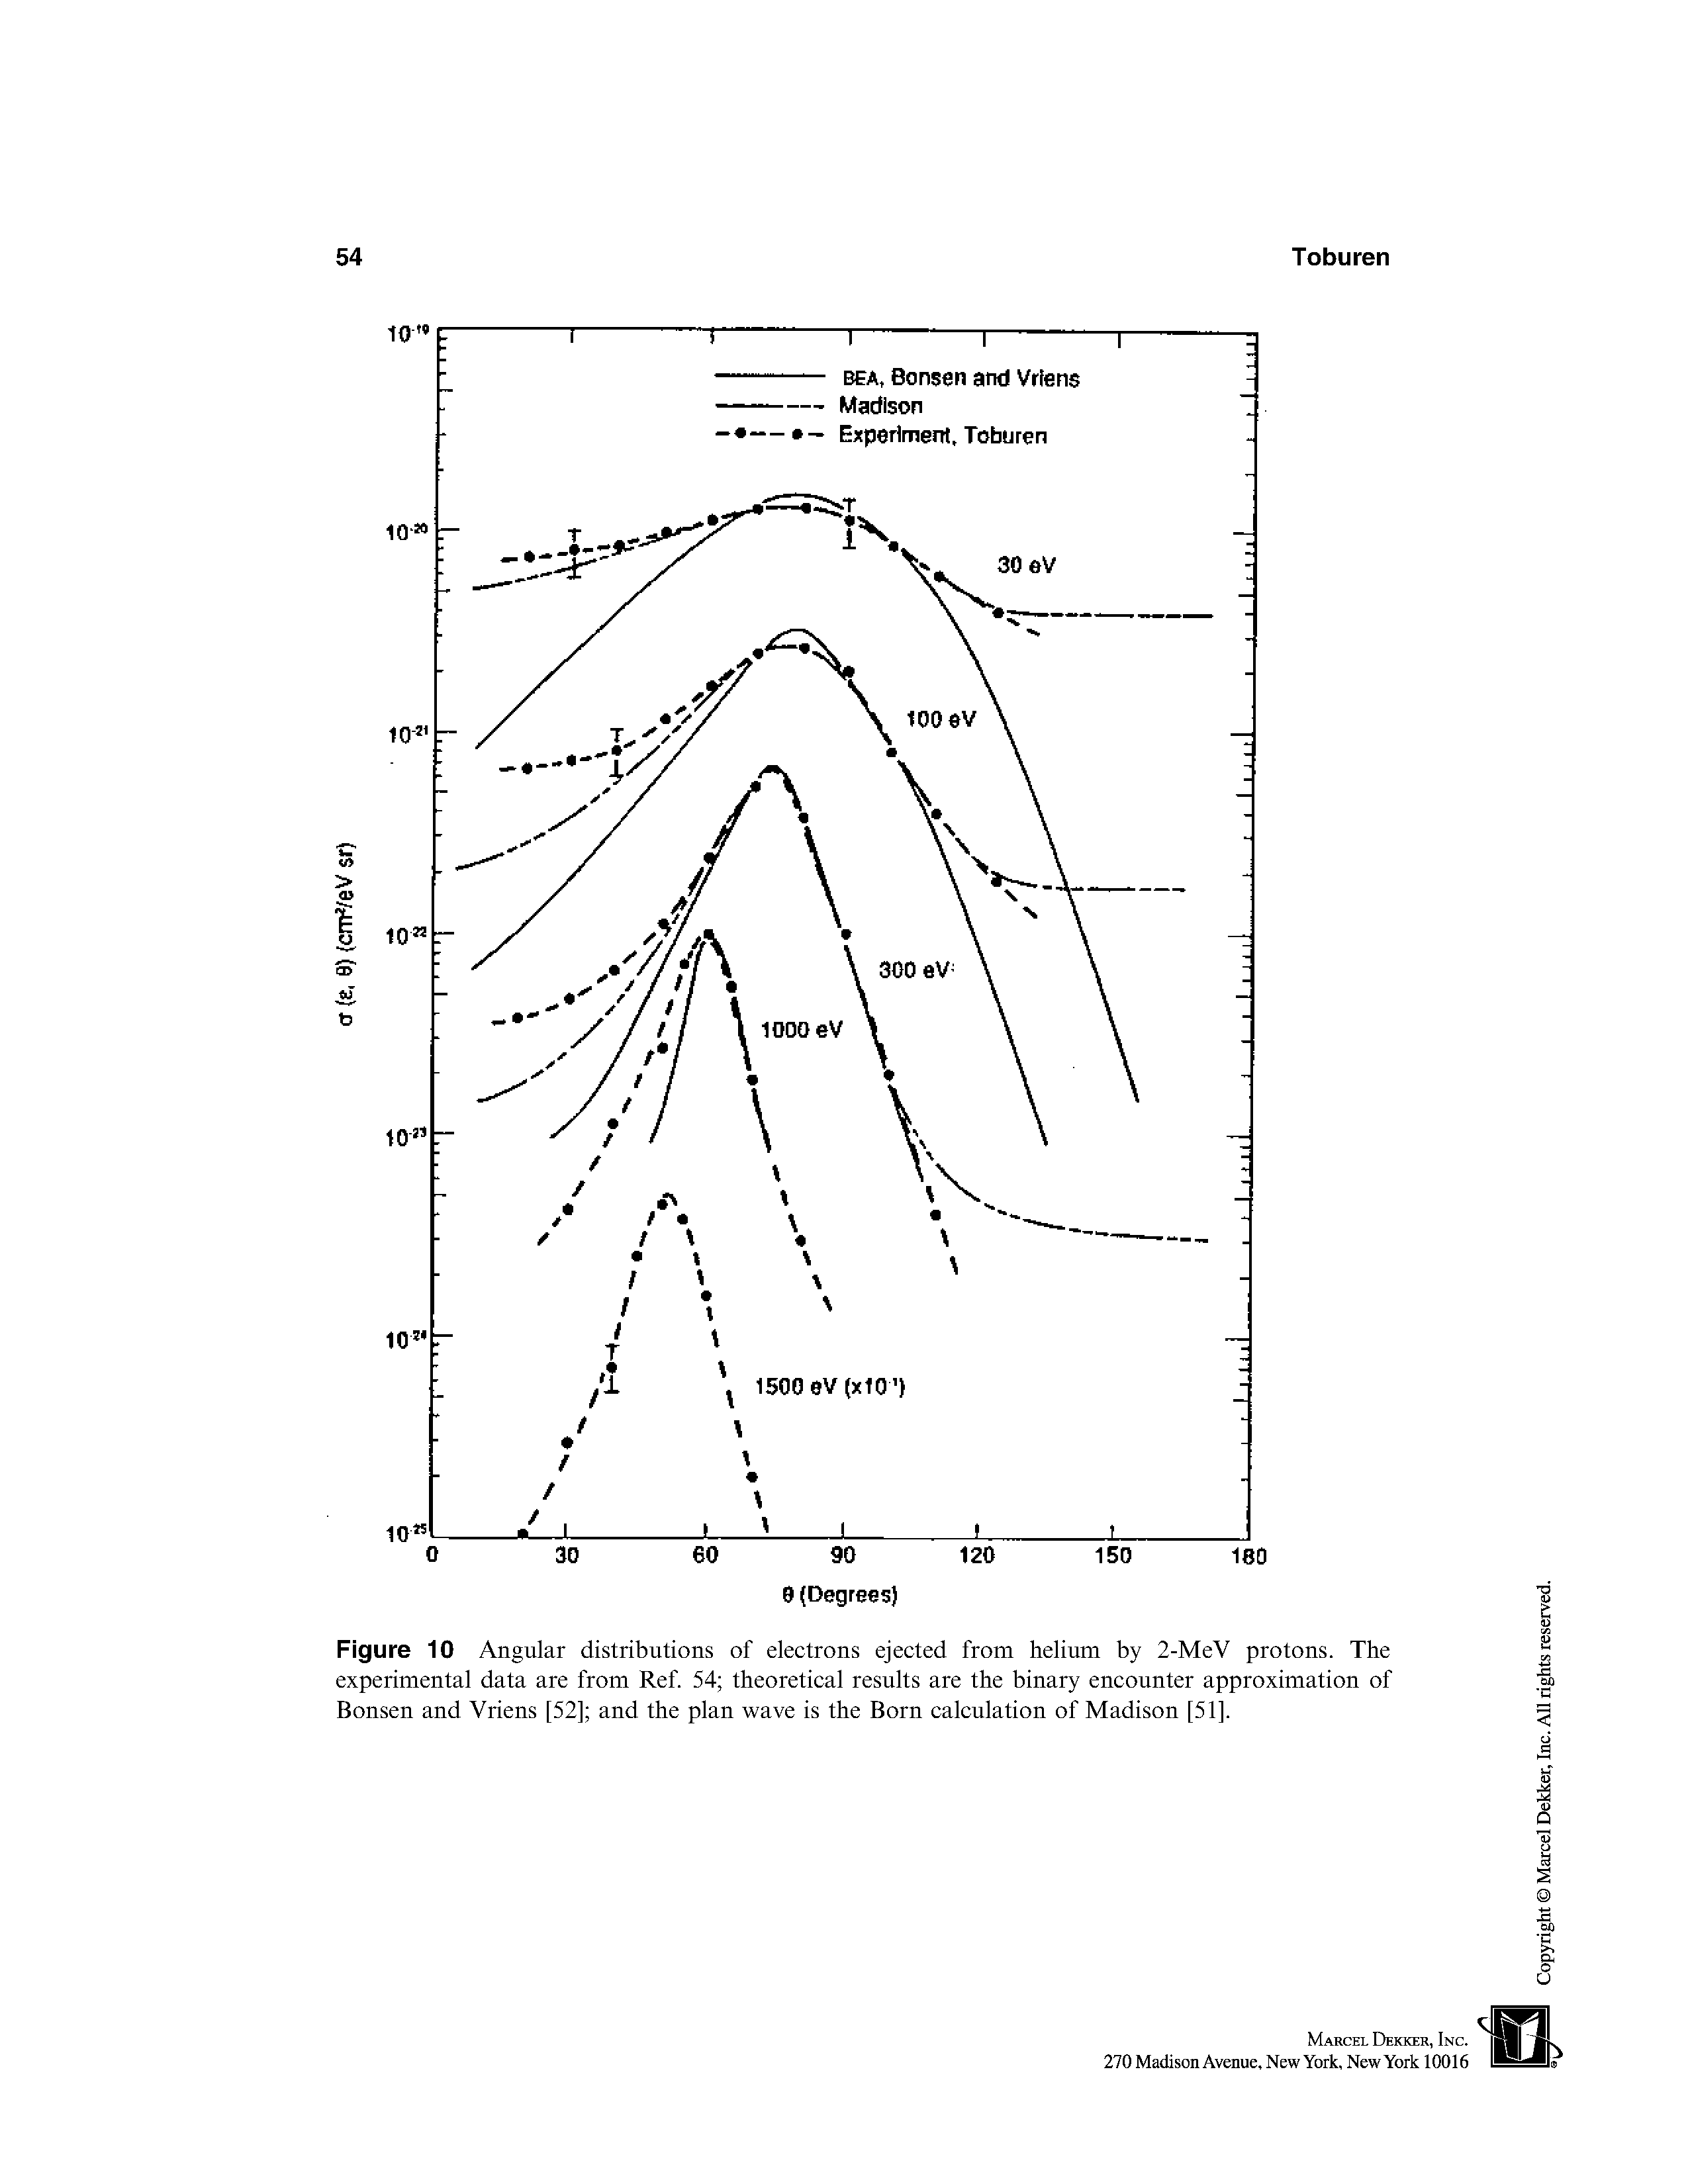 Figure 10 Angular distributions of electrons ejected from helium by 2-MeV protons. The experimental data are from Ref 54 theoretical results are the binary encounter approximation of Bonsen and Vriens [52] and the plan wave is the Born calculation of Madison [51].